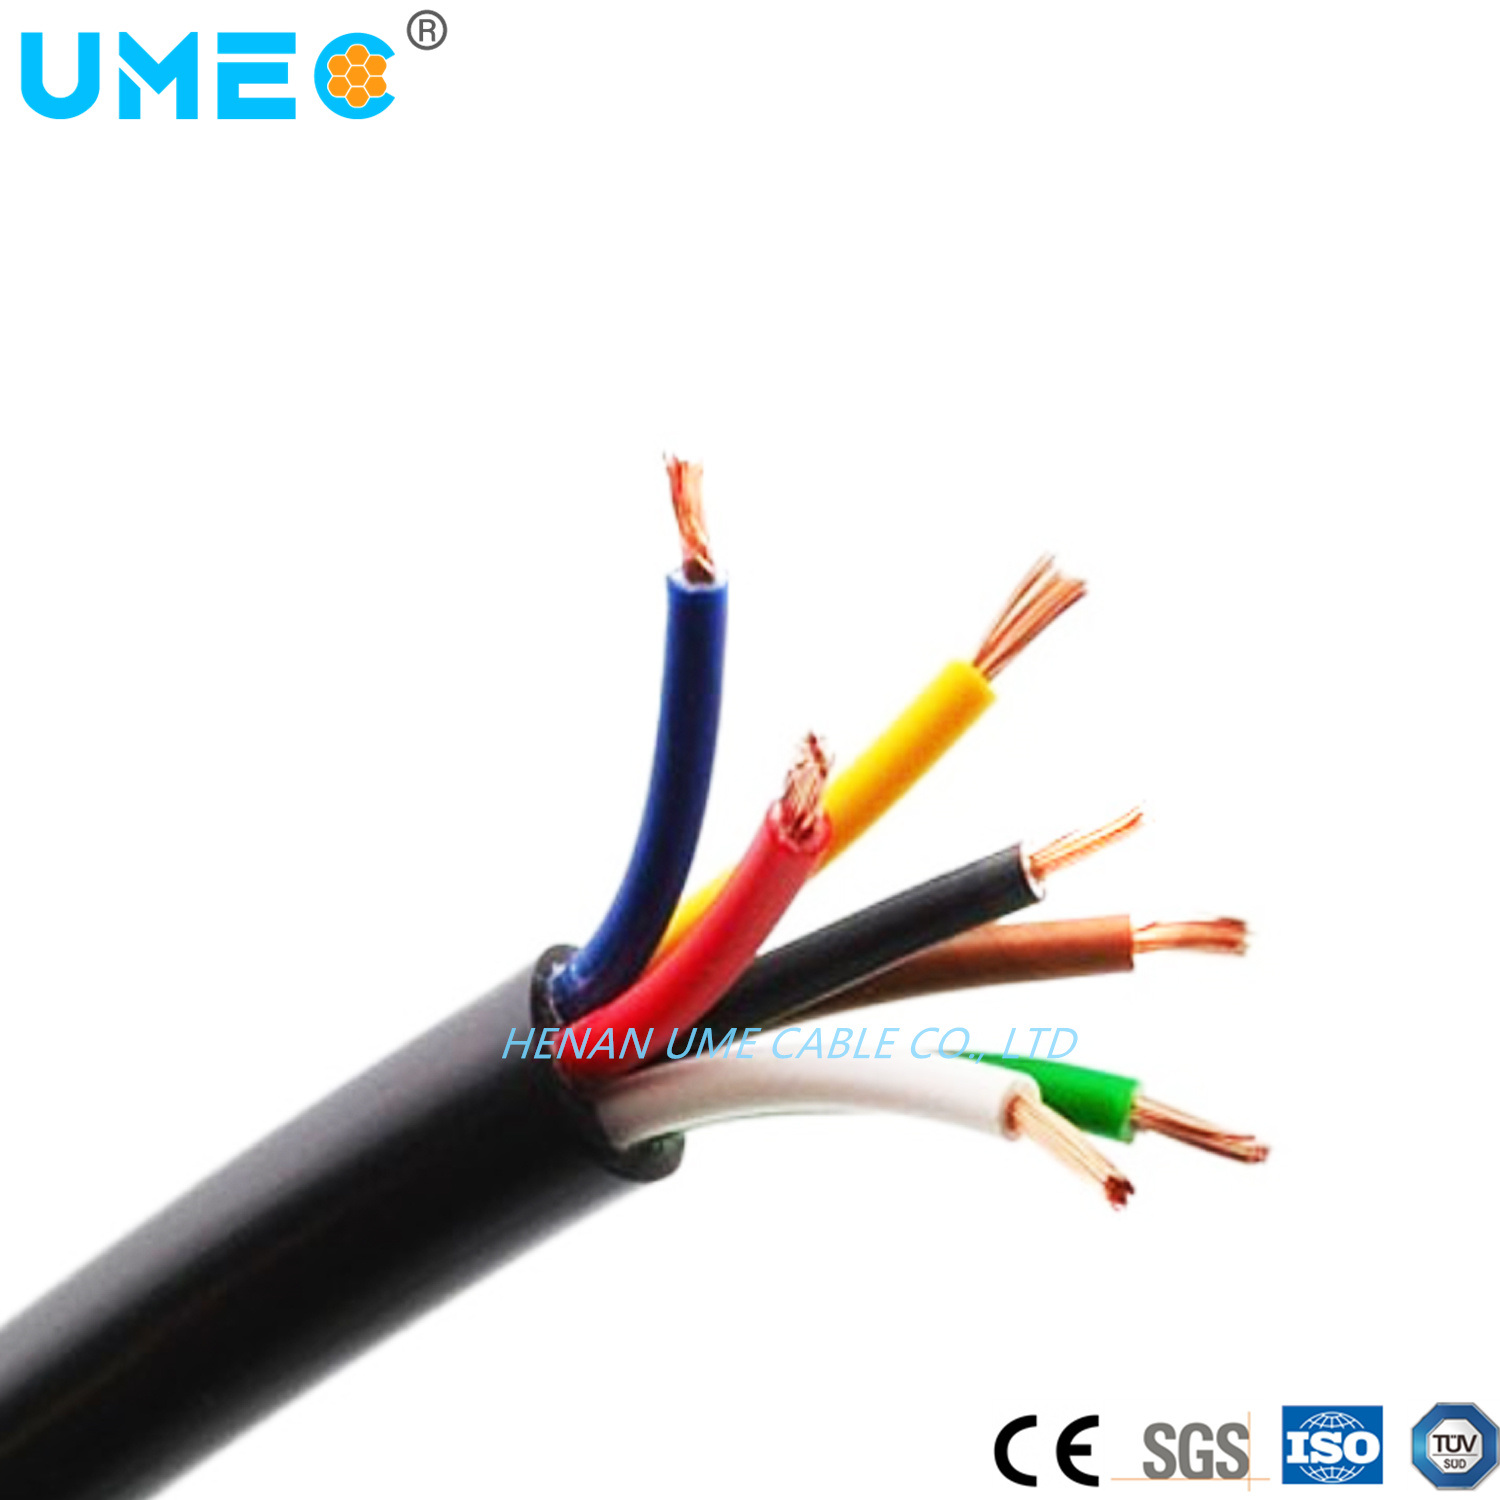 Free Sample Multi-Core 2.5 4 6 8 10sqmm High Flexible Copper Royal Cord Electrical Cable